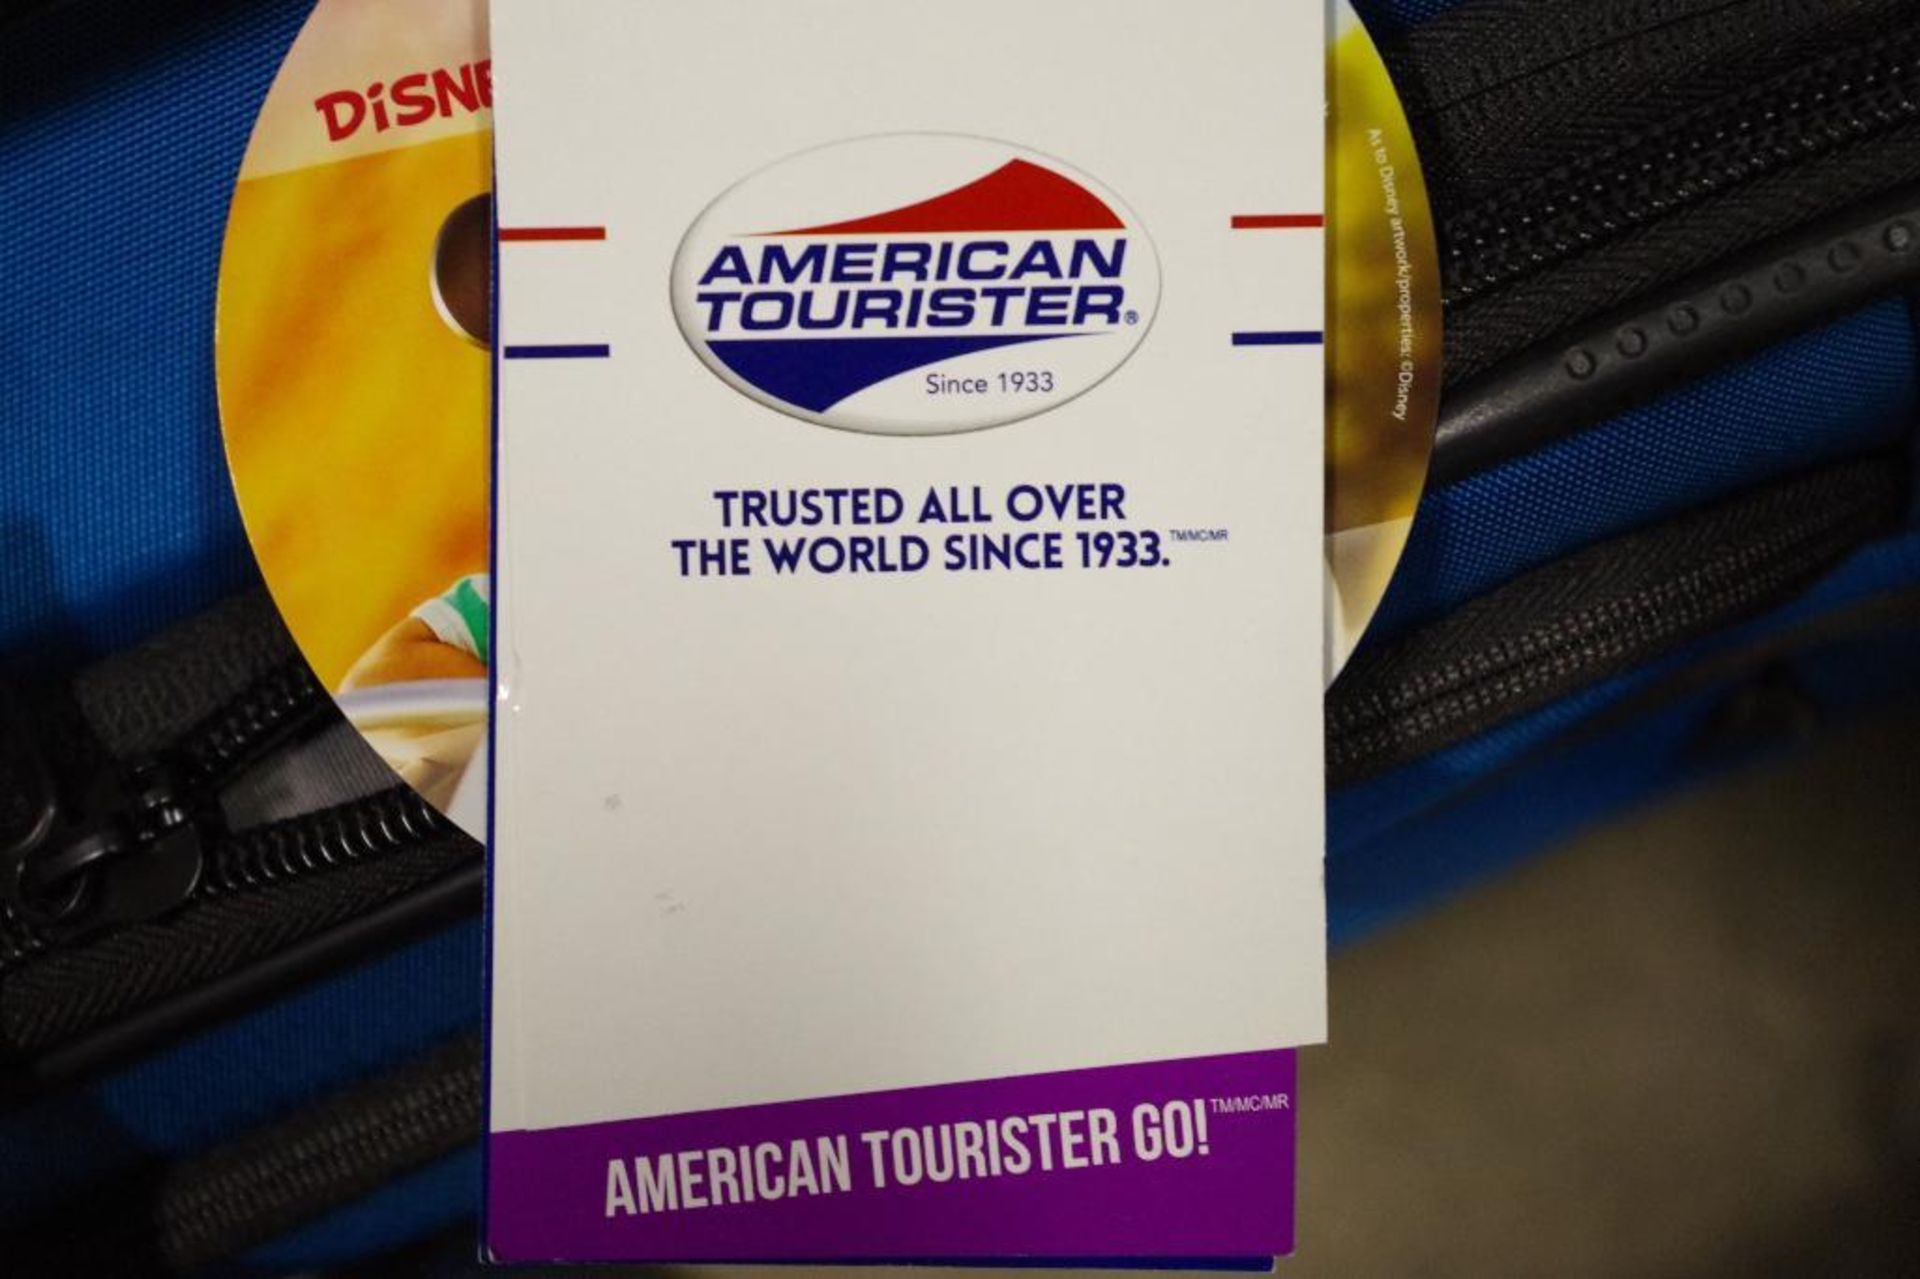 AMERICAN TOURISTER Carry-on Luggage, Appears New - Image 2 of 3